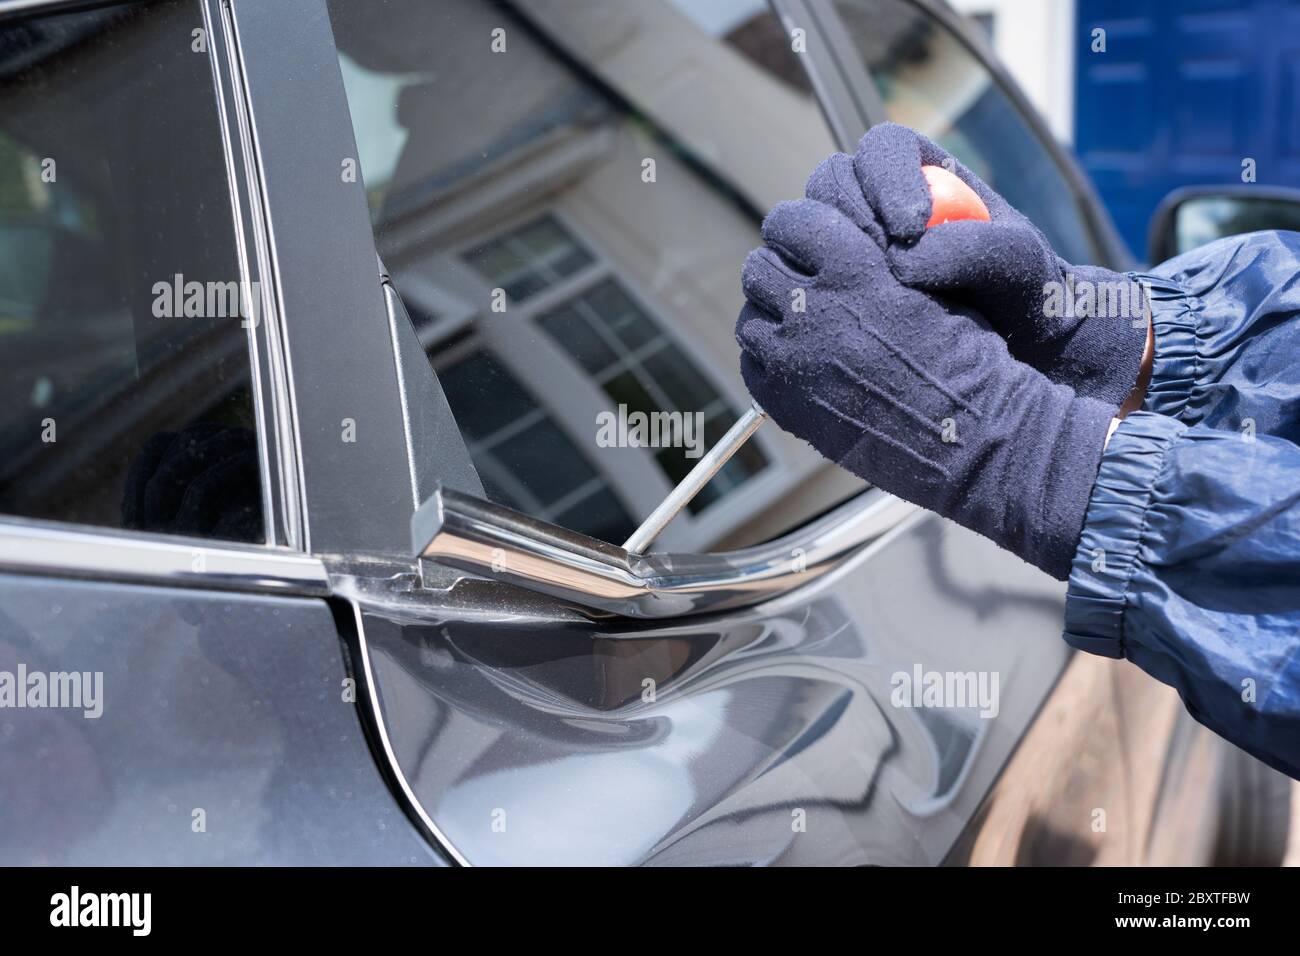 Thief attempting to break into a car with a screwdriver and damaging the car's bodywork in the process. Hertfordshire. UK Stock Photo